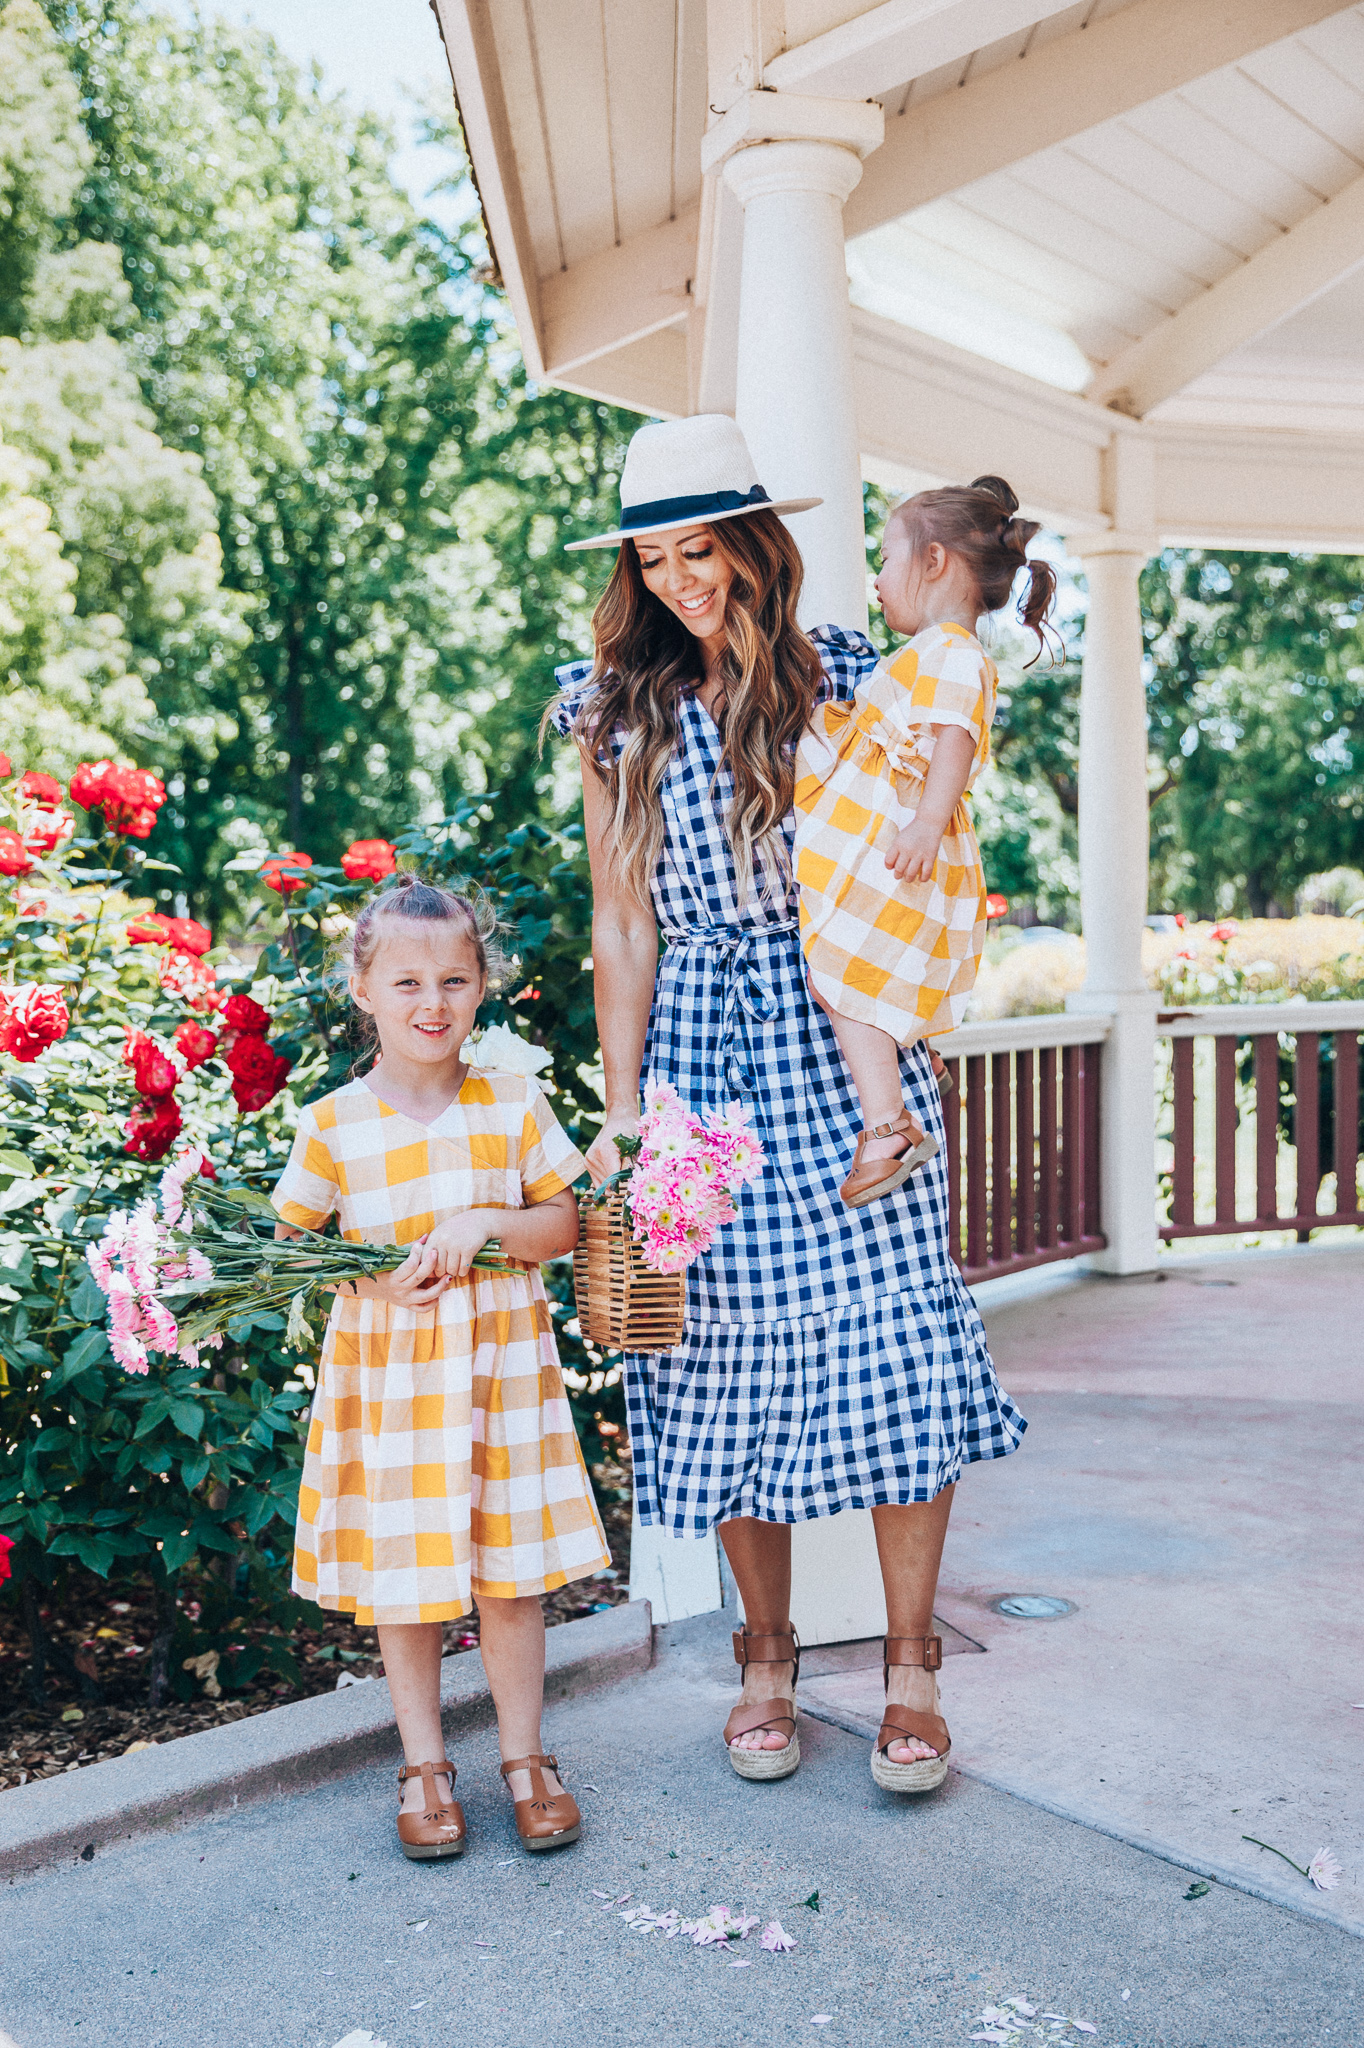 Cute Summer Dresses featured by top US fashion blog The Girl in the Yellow Dress